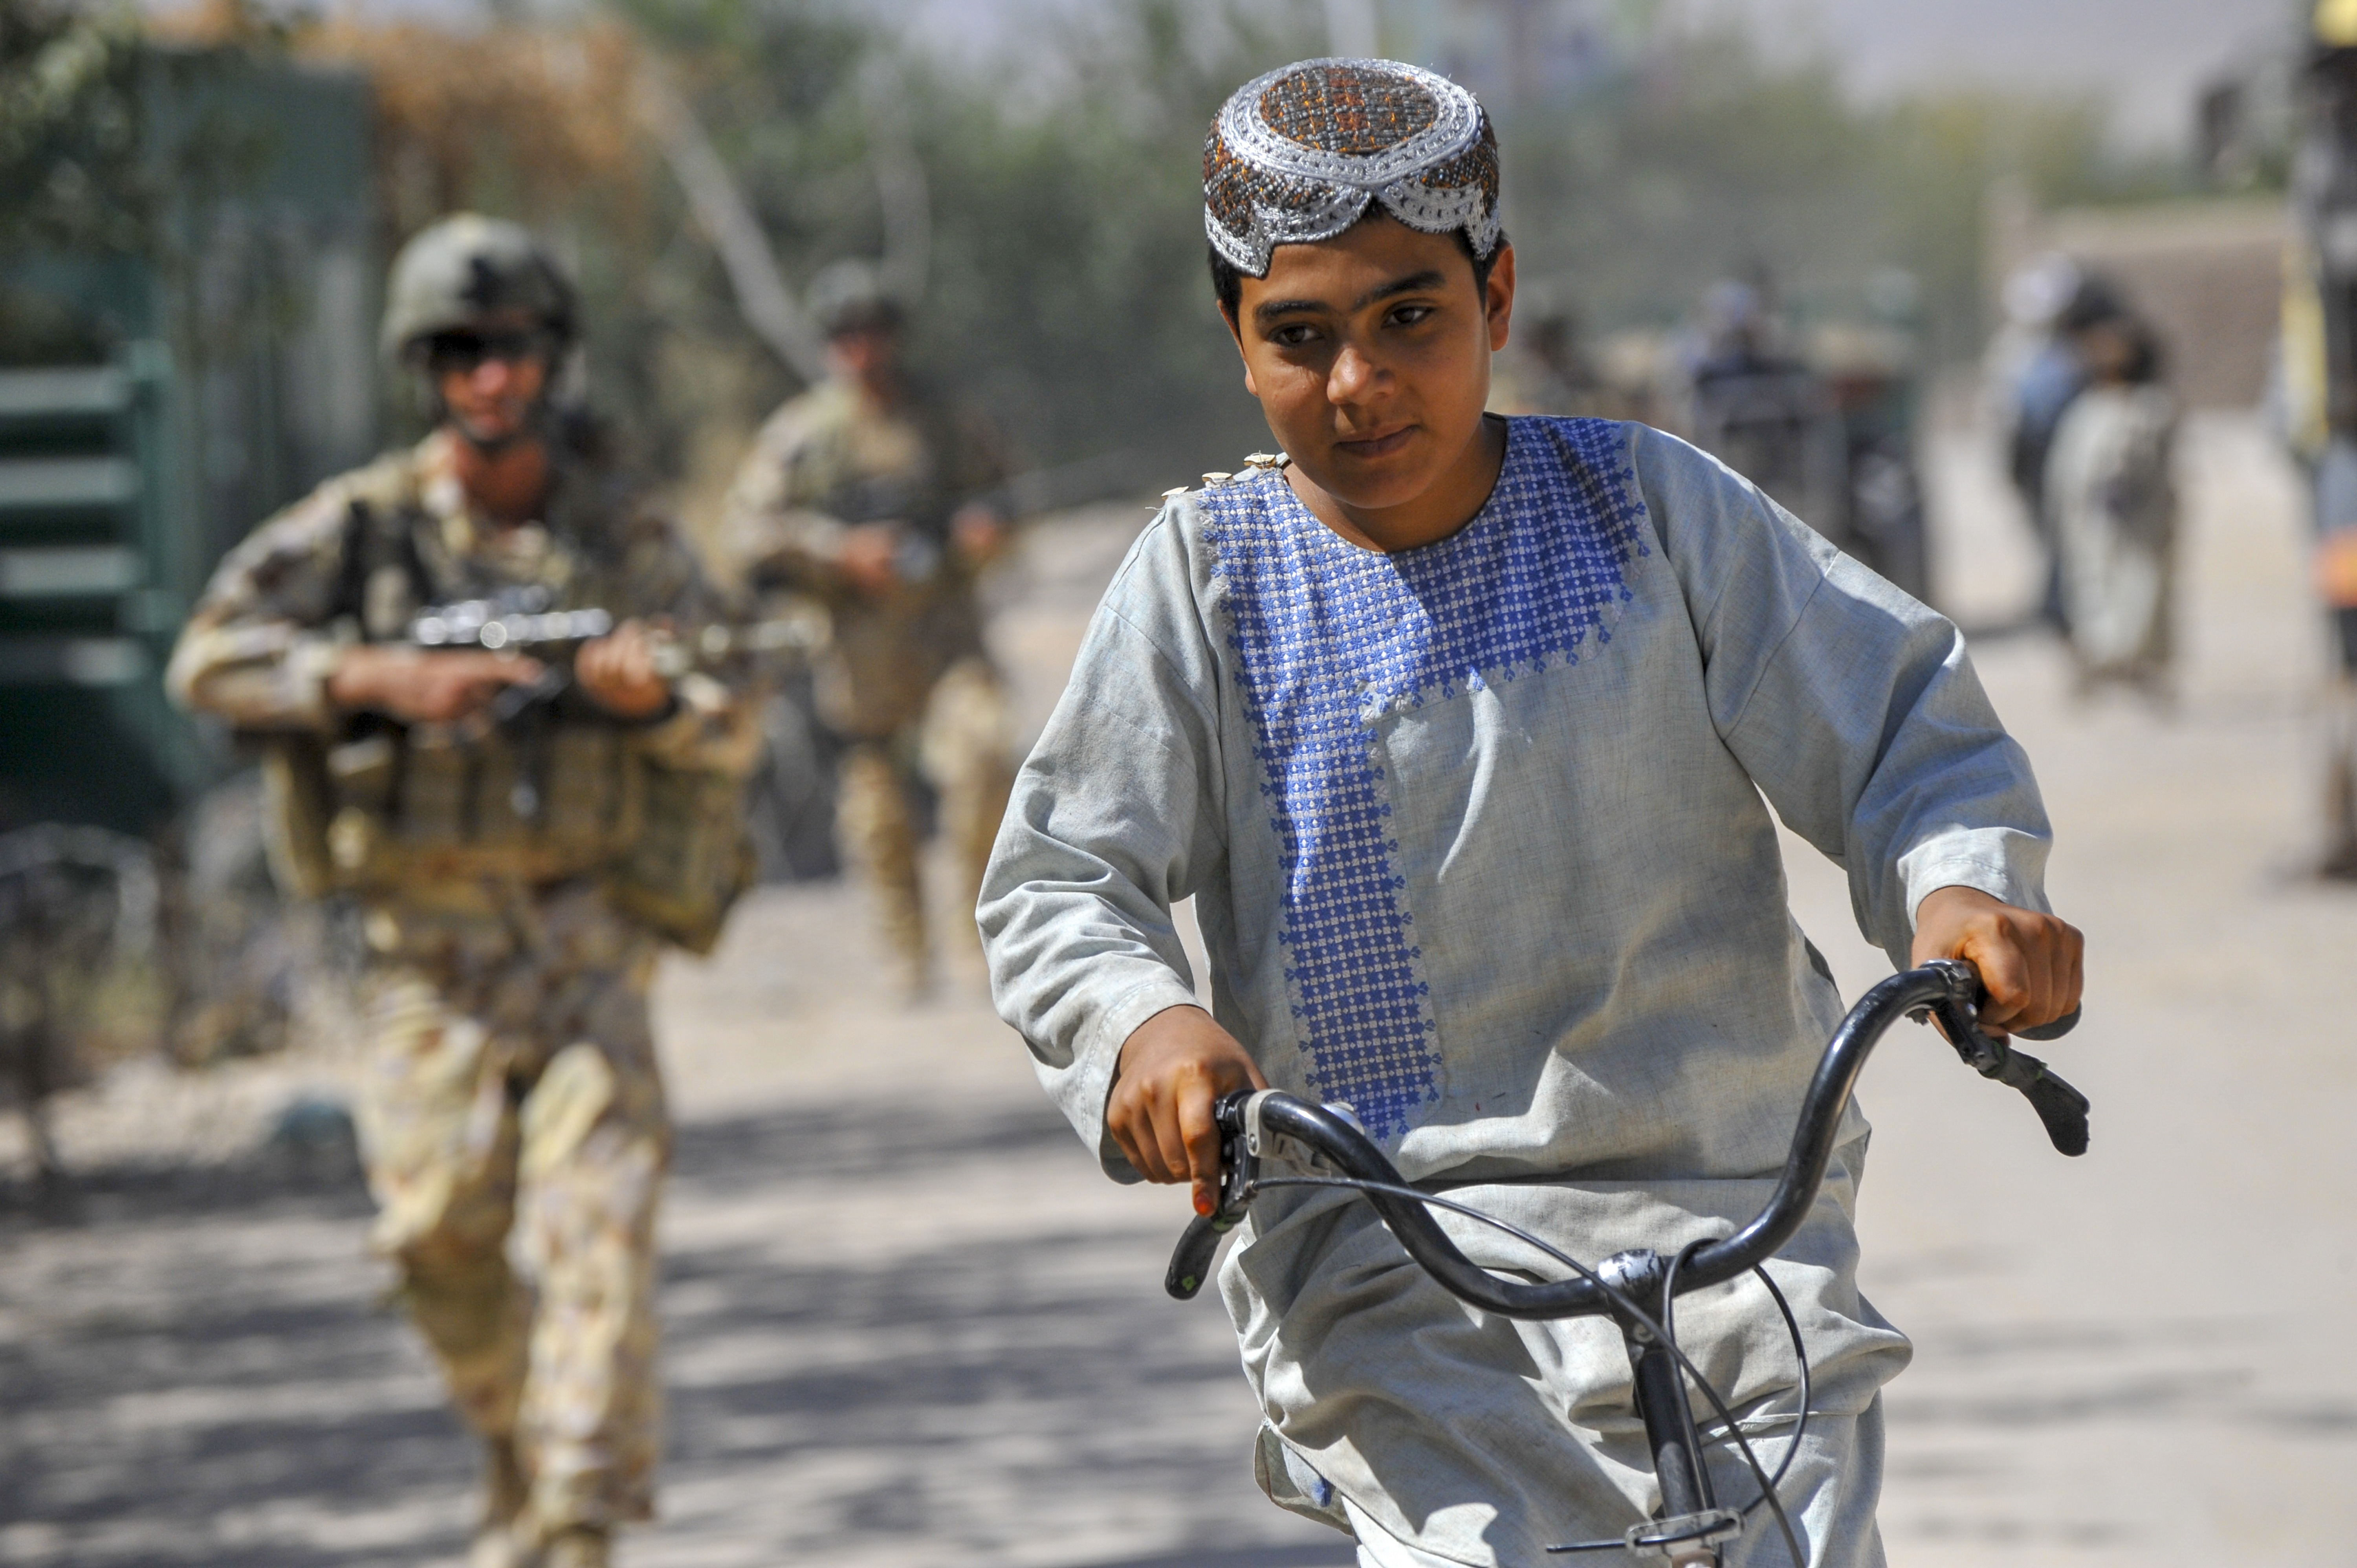 Young Afghan boy rides his bike past Townsville soldiers on foot patrol through the township of Tarin Kowt, Afghanistan, 2009